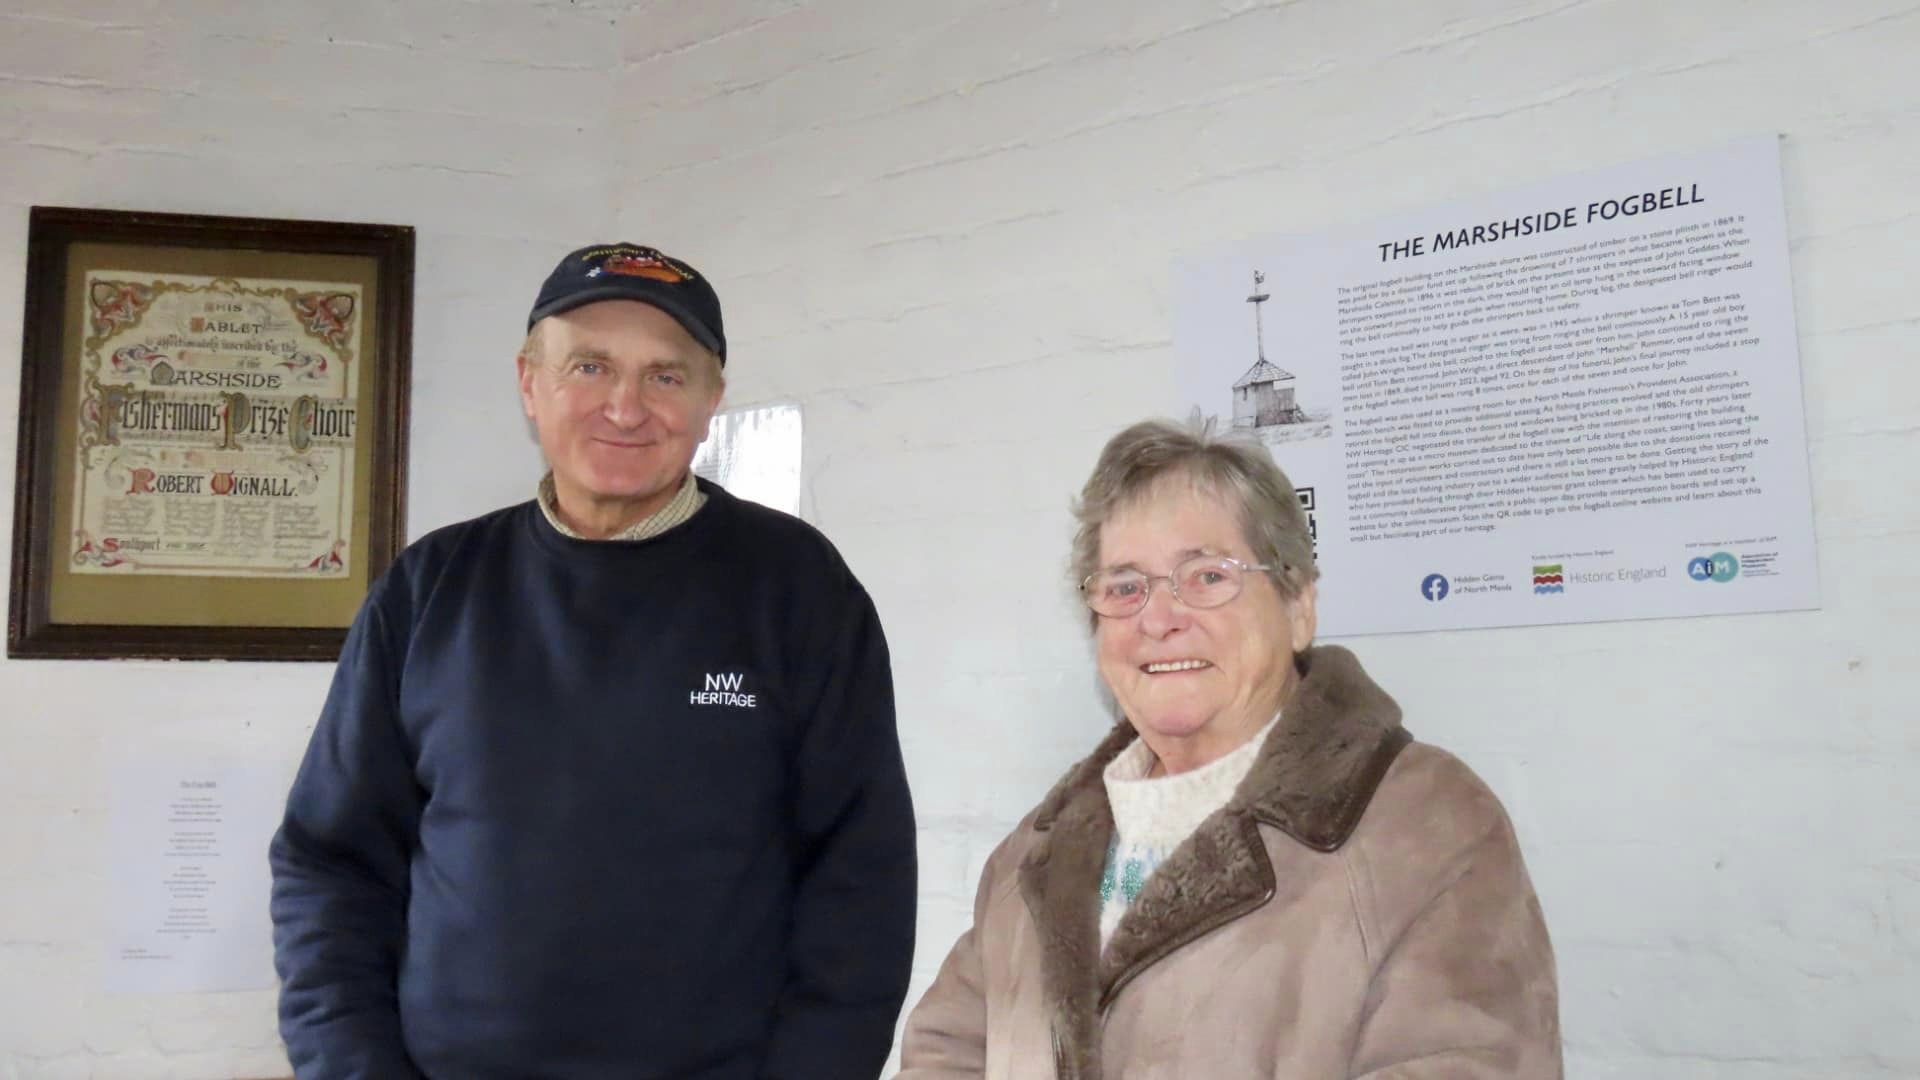 People enjoyed a first look inside the newly restored Marshside Fog Bell in Southport when an Open Day took place. Paul Sherman and Gladys Armstrong. Photo by Andrew Brown Stand Up For Southport